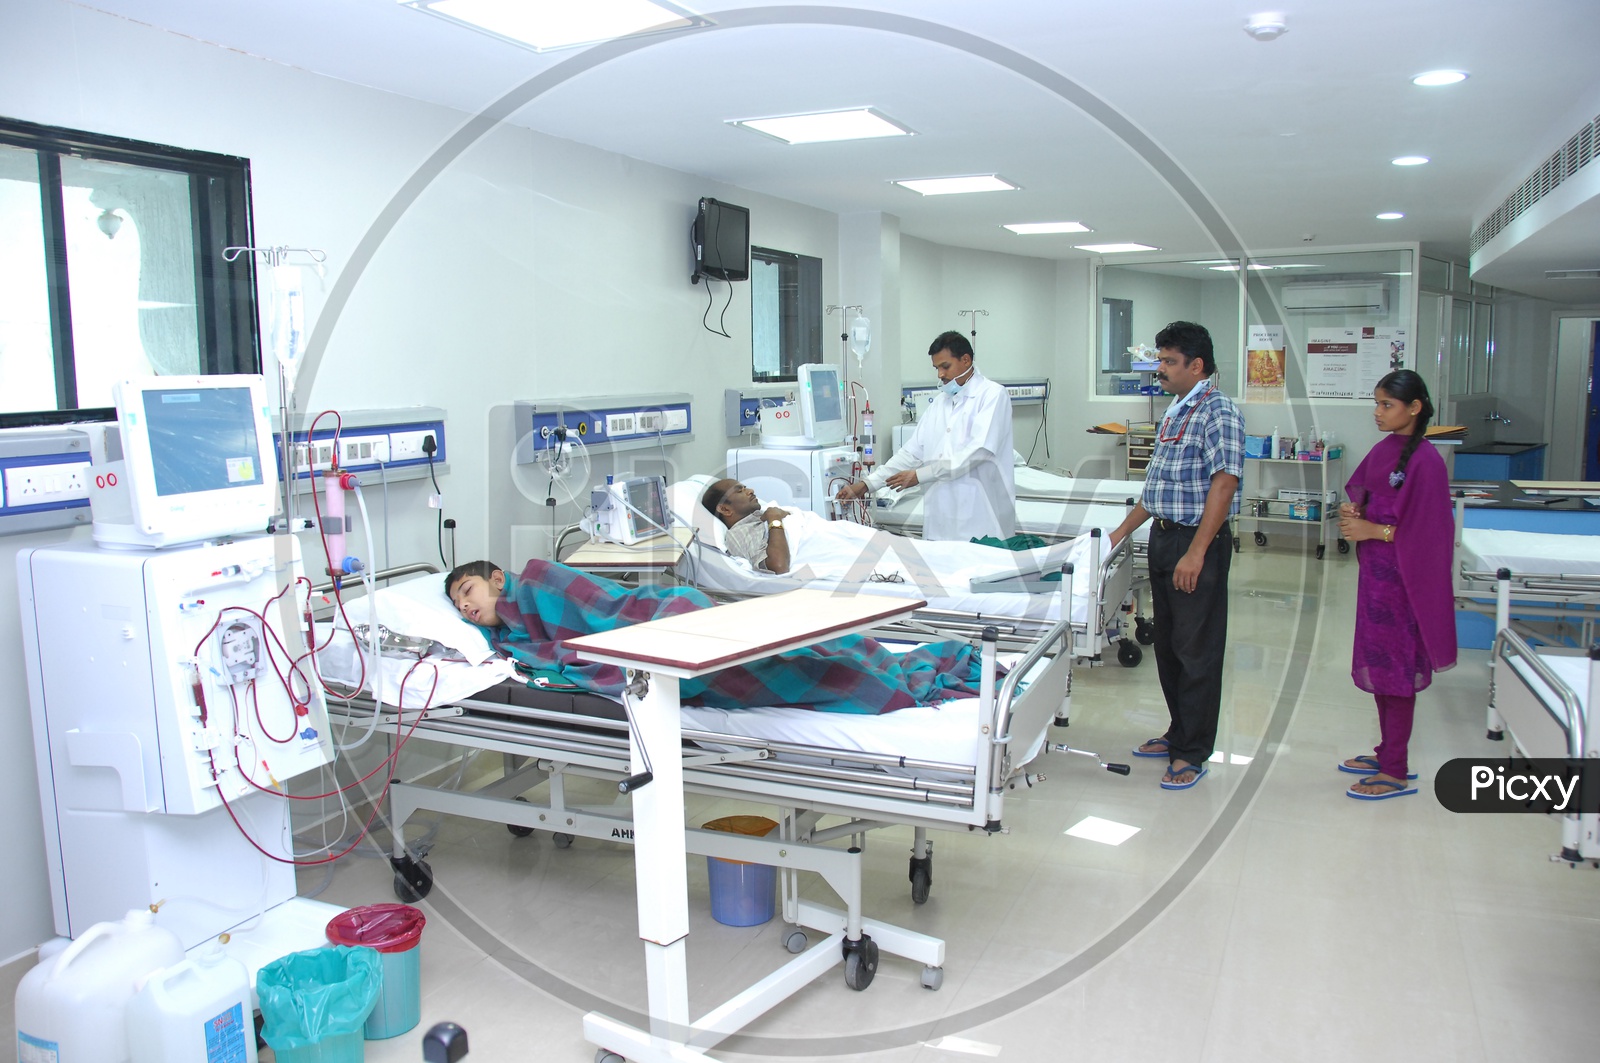 ICU Ward With Patient Beds